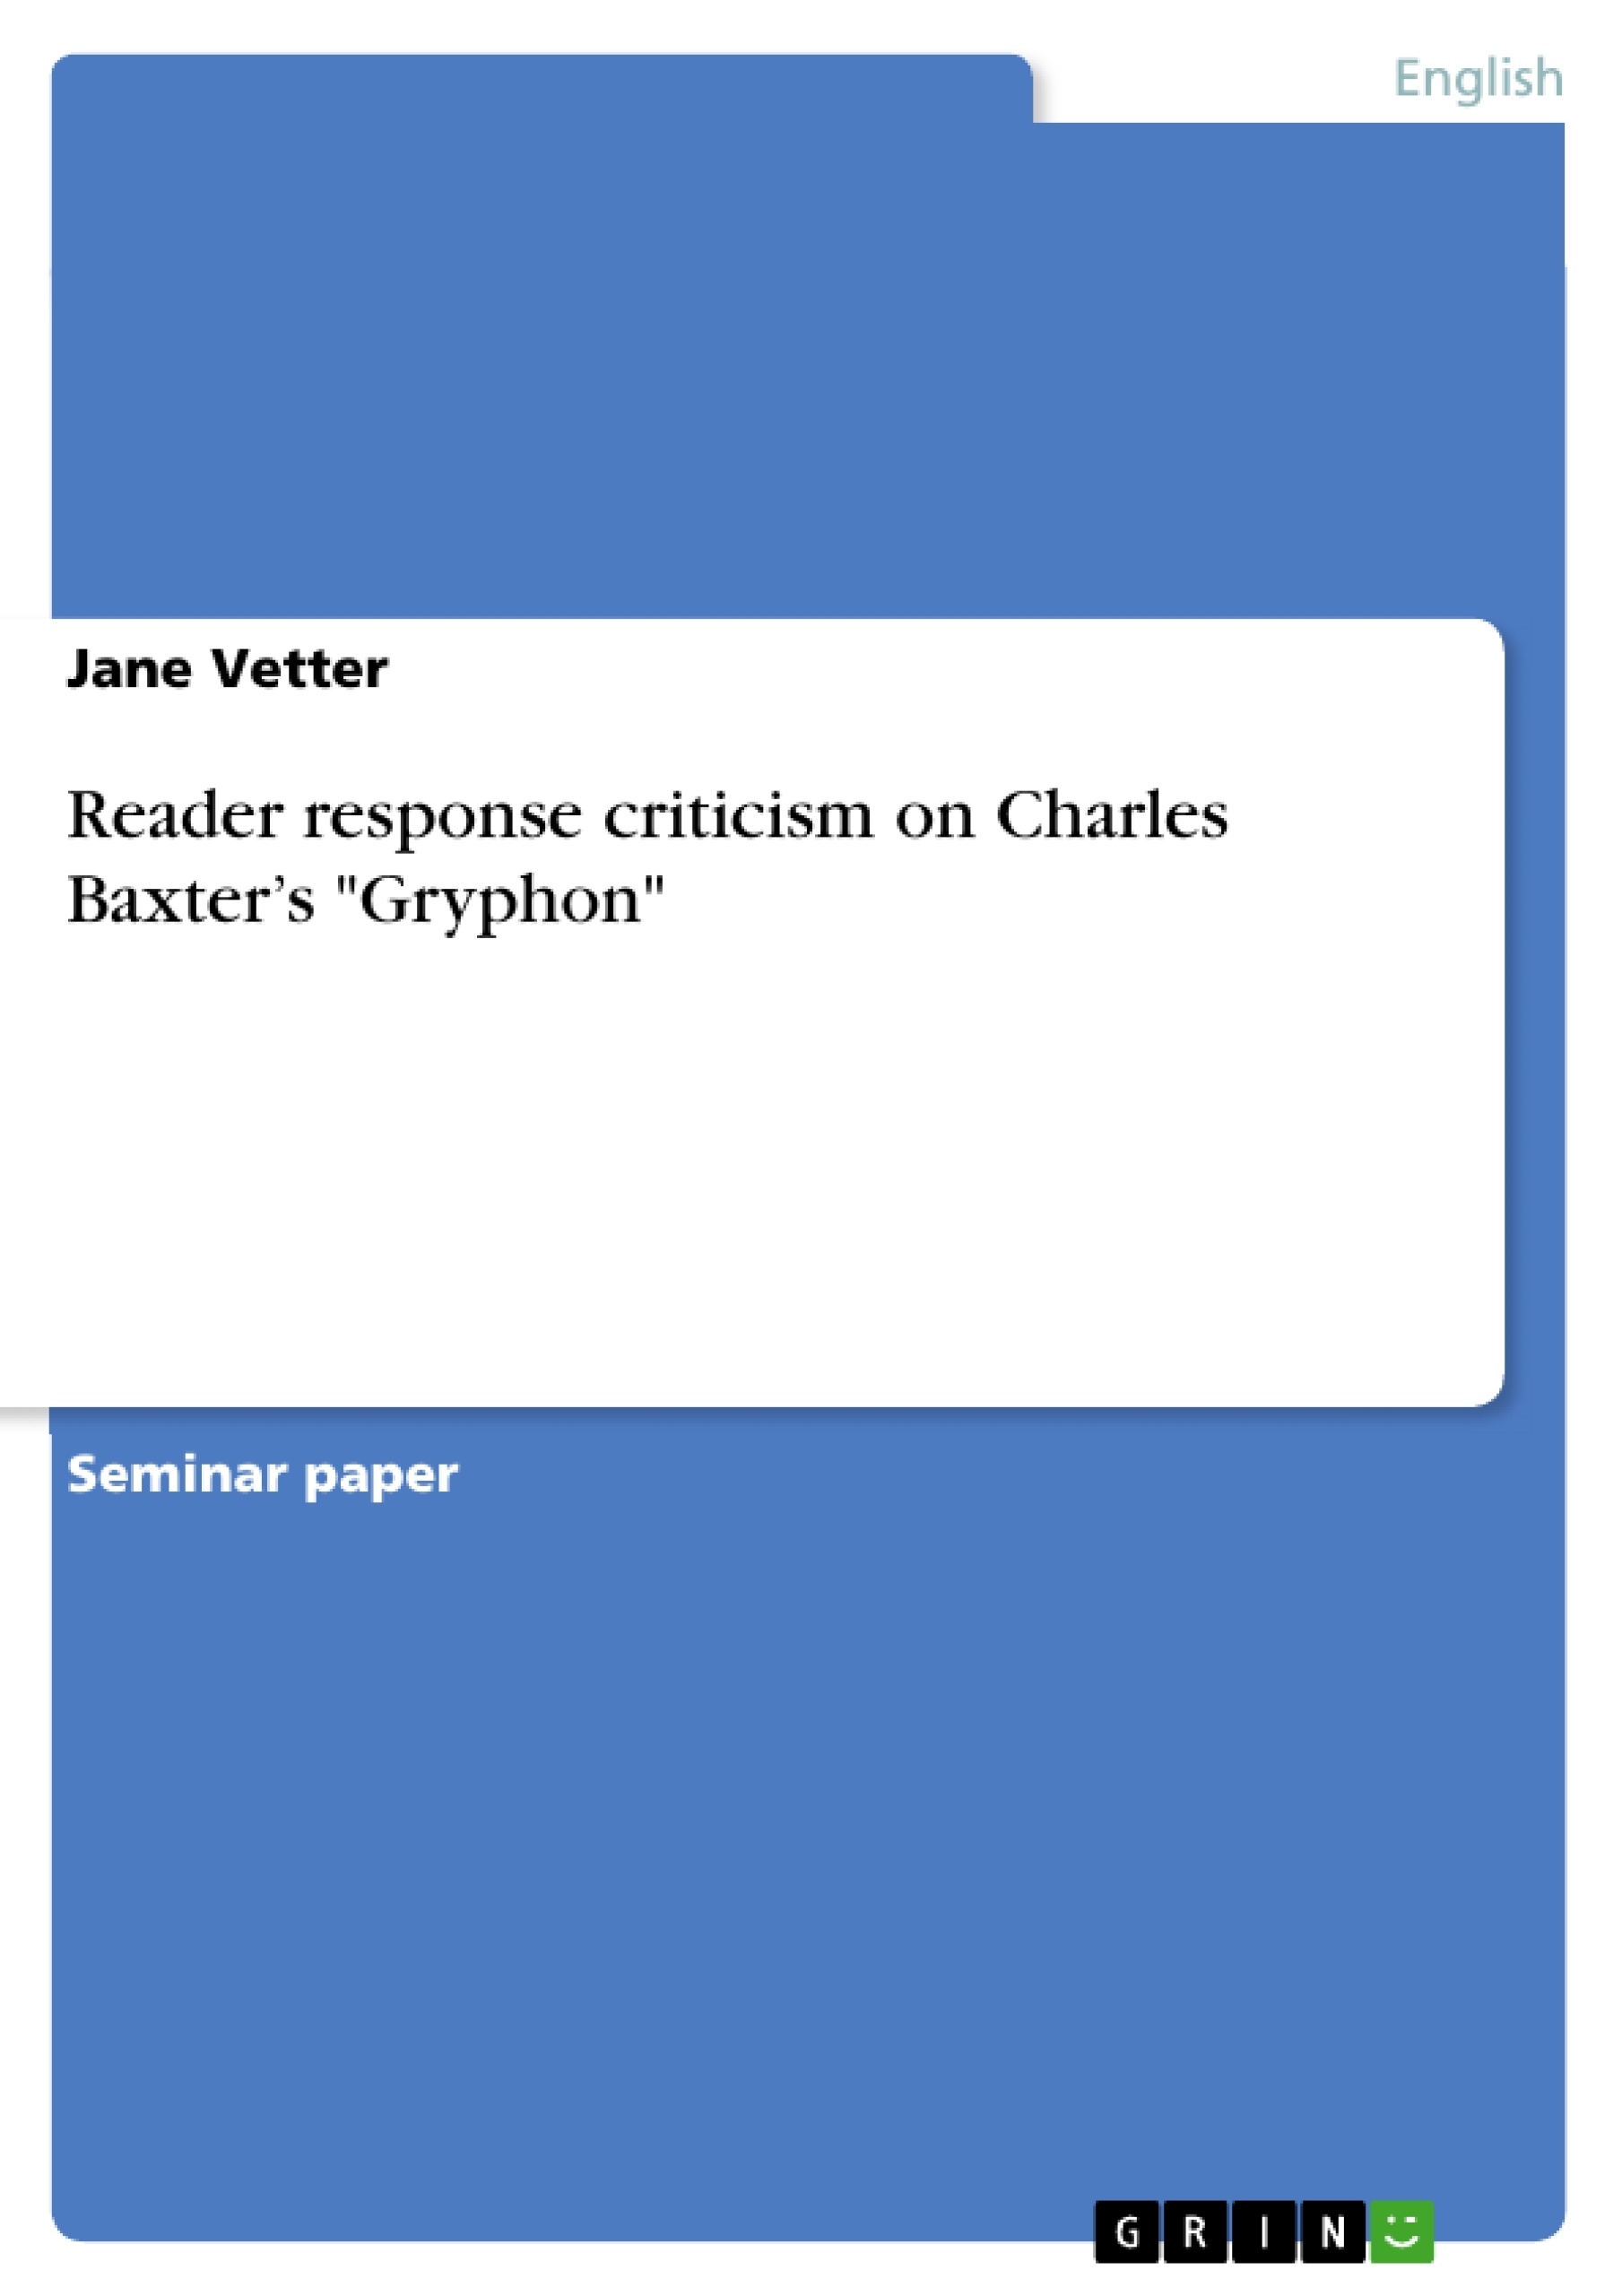 gryphon charles baxter full text online